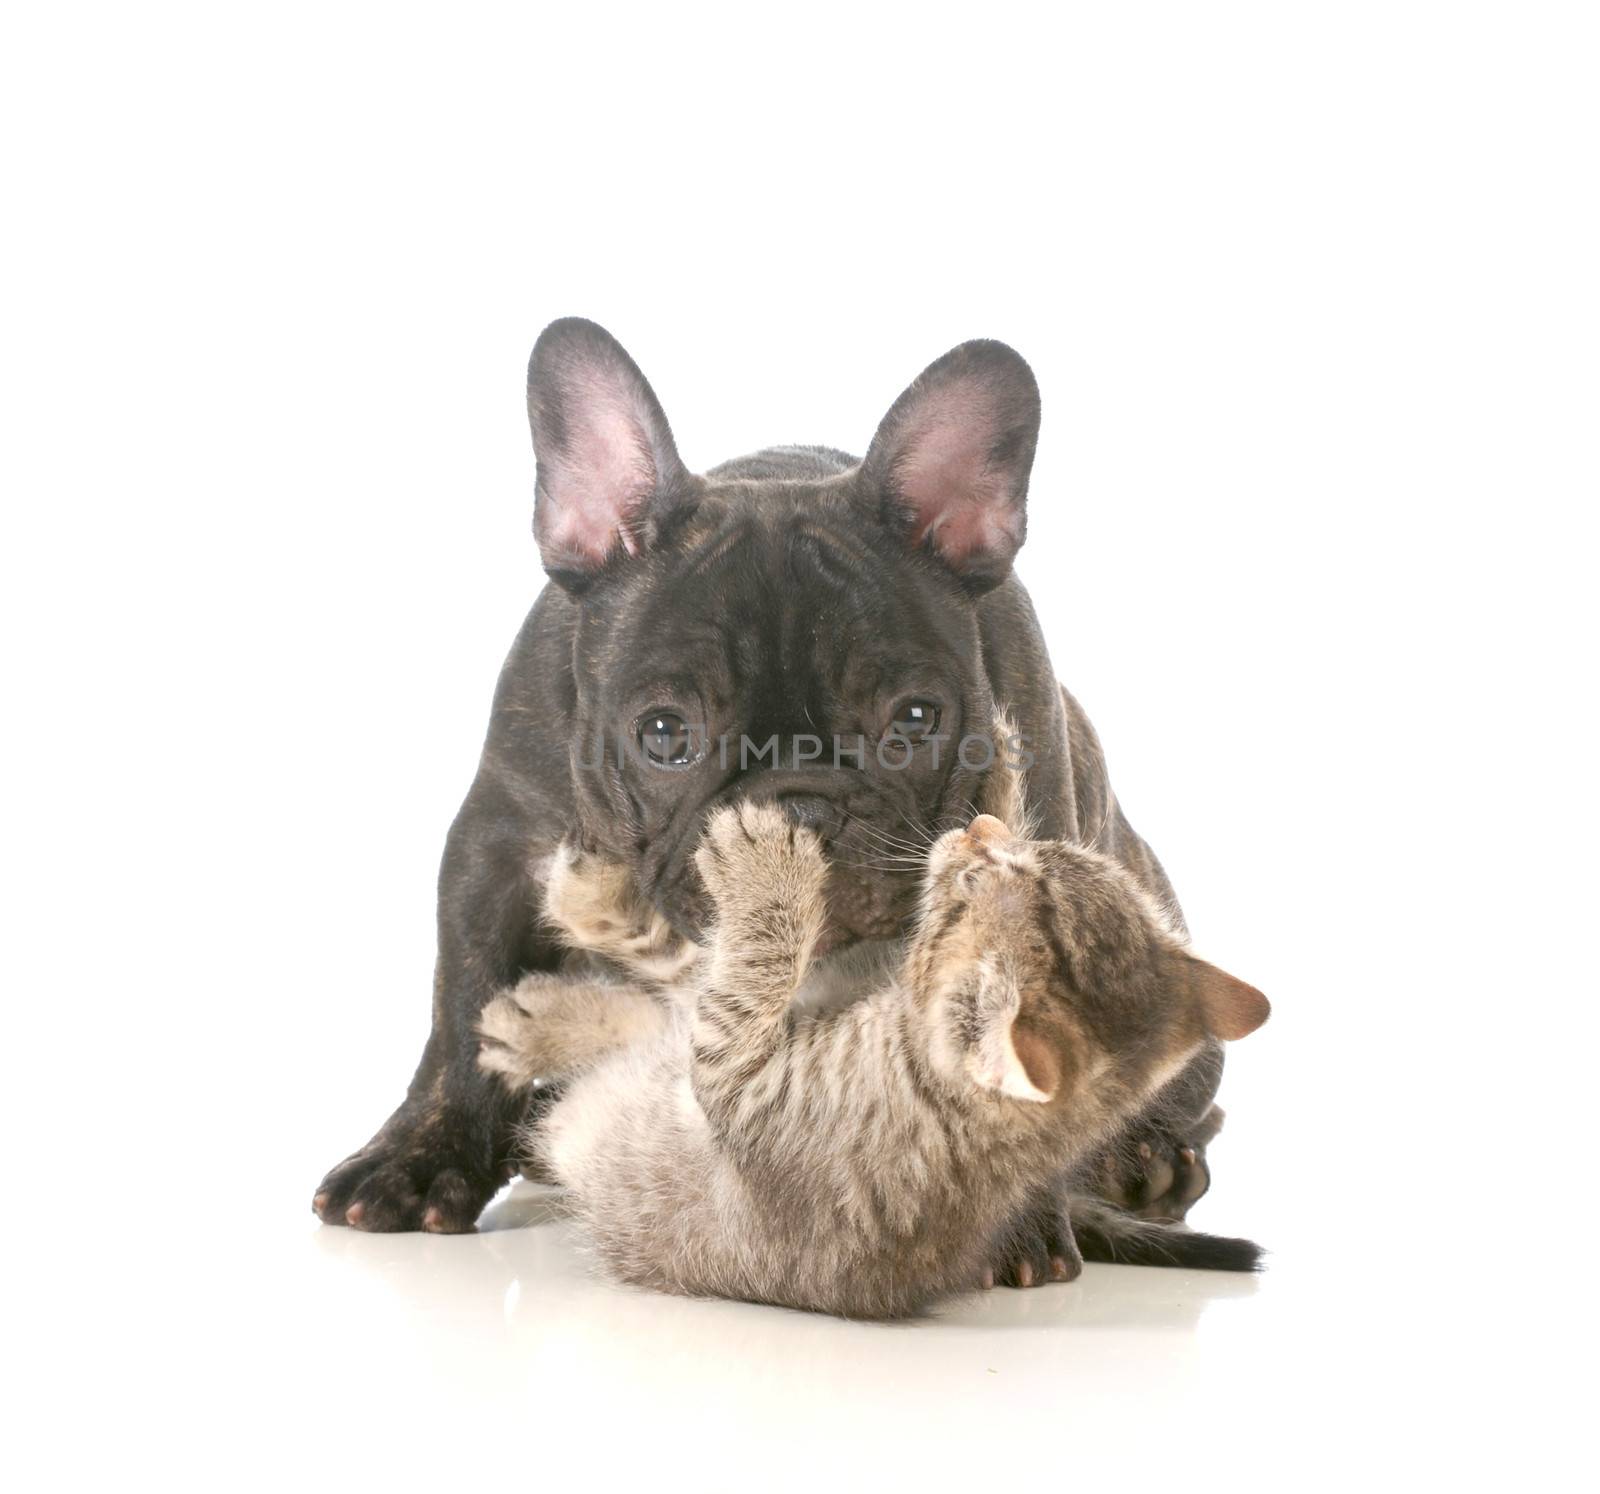 puppy and kitten playing - french bulldog puppy being attacked by a young playful kitten isolated on white background